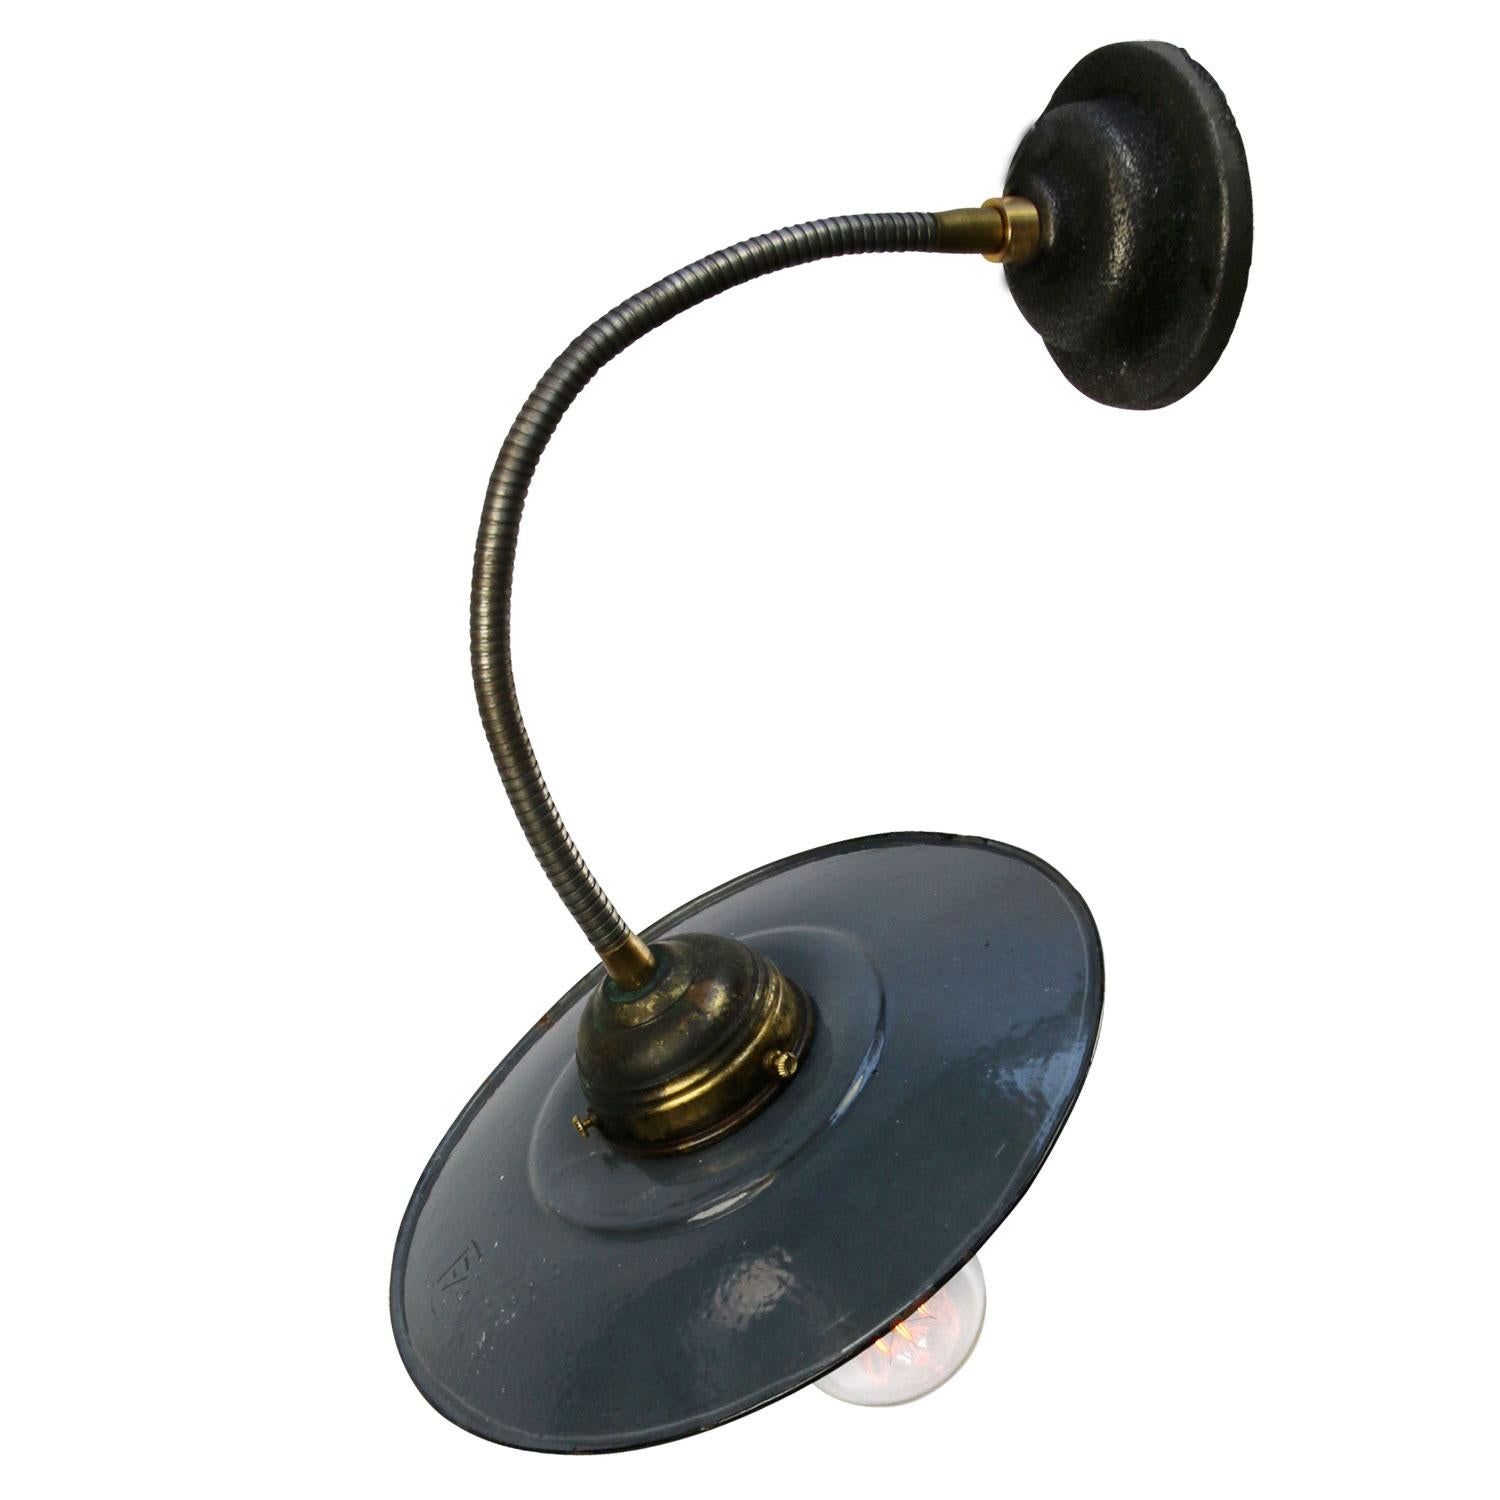 Wall light spot.
Wall light spot downlighter
blue enamel shade white interior
Gooseneck arm adjustable in angle.

diameter cast iron wall mount 10.5 cm / 4”

Weight: 1.50 kg / 3.3 lb

Priced per individual item. All lamps have been made